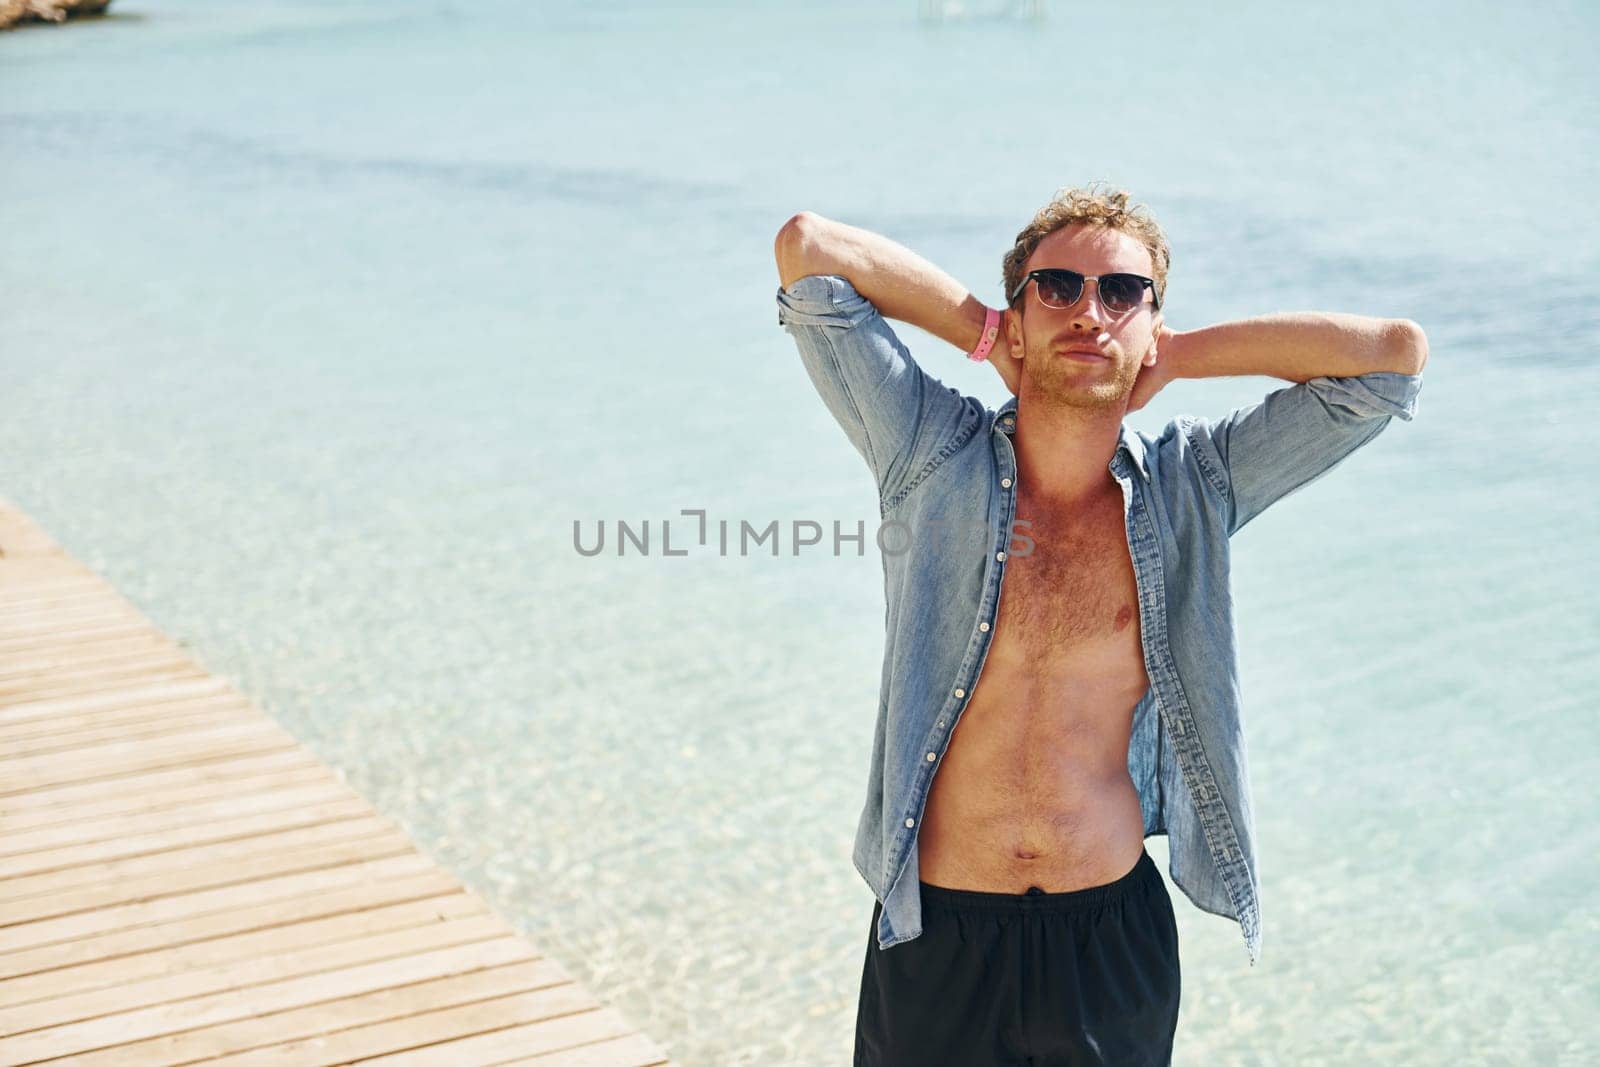 In sunglasses. Young european man have vacation and enjoying free time on the beach of sea.